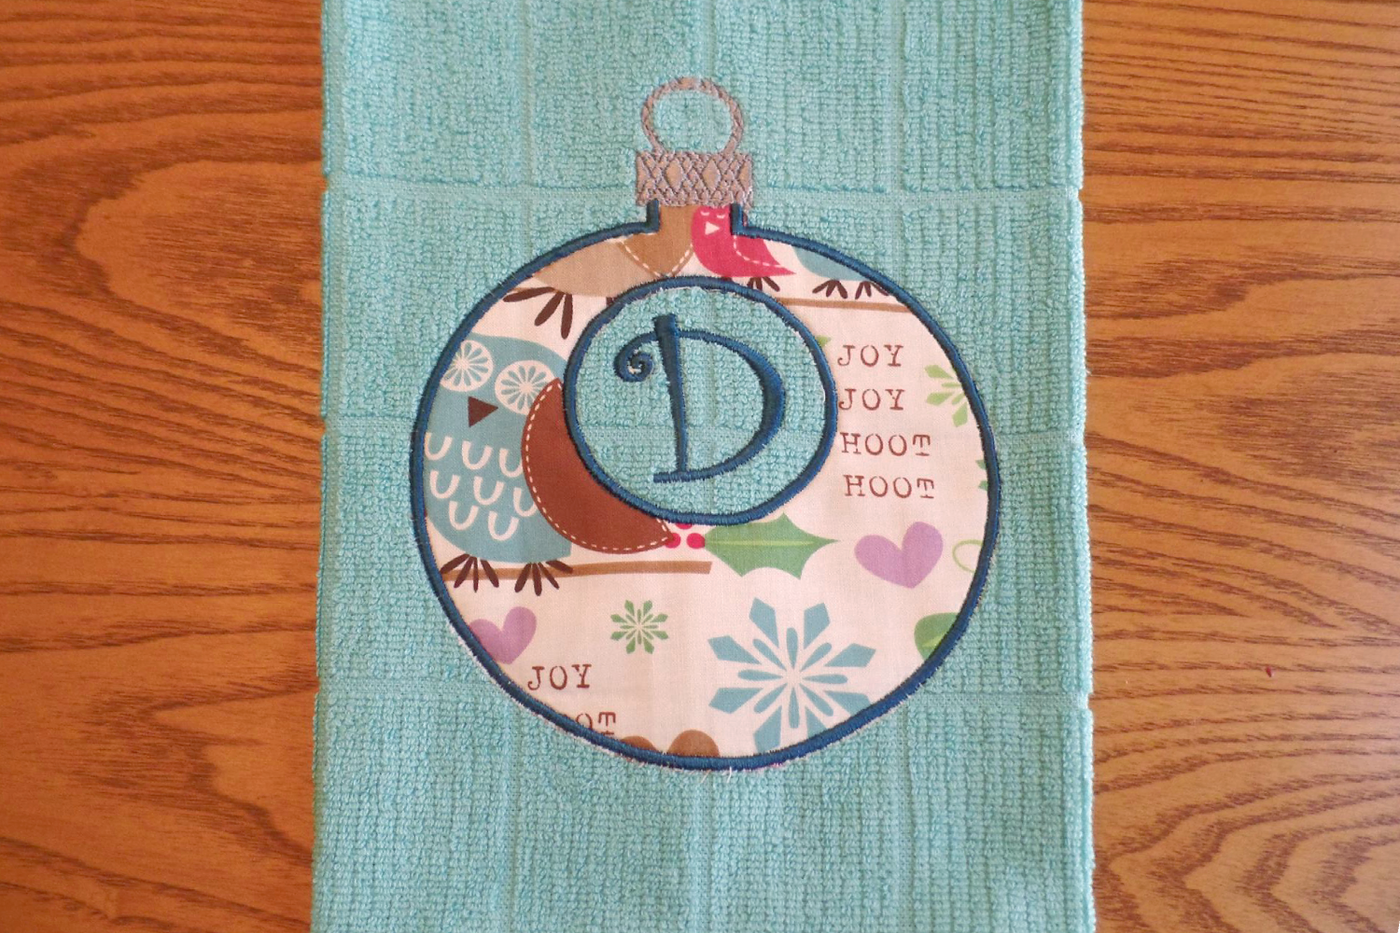 Round ornament applique with a circle inside for adding a monogram